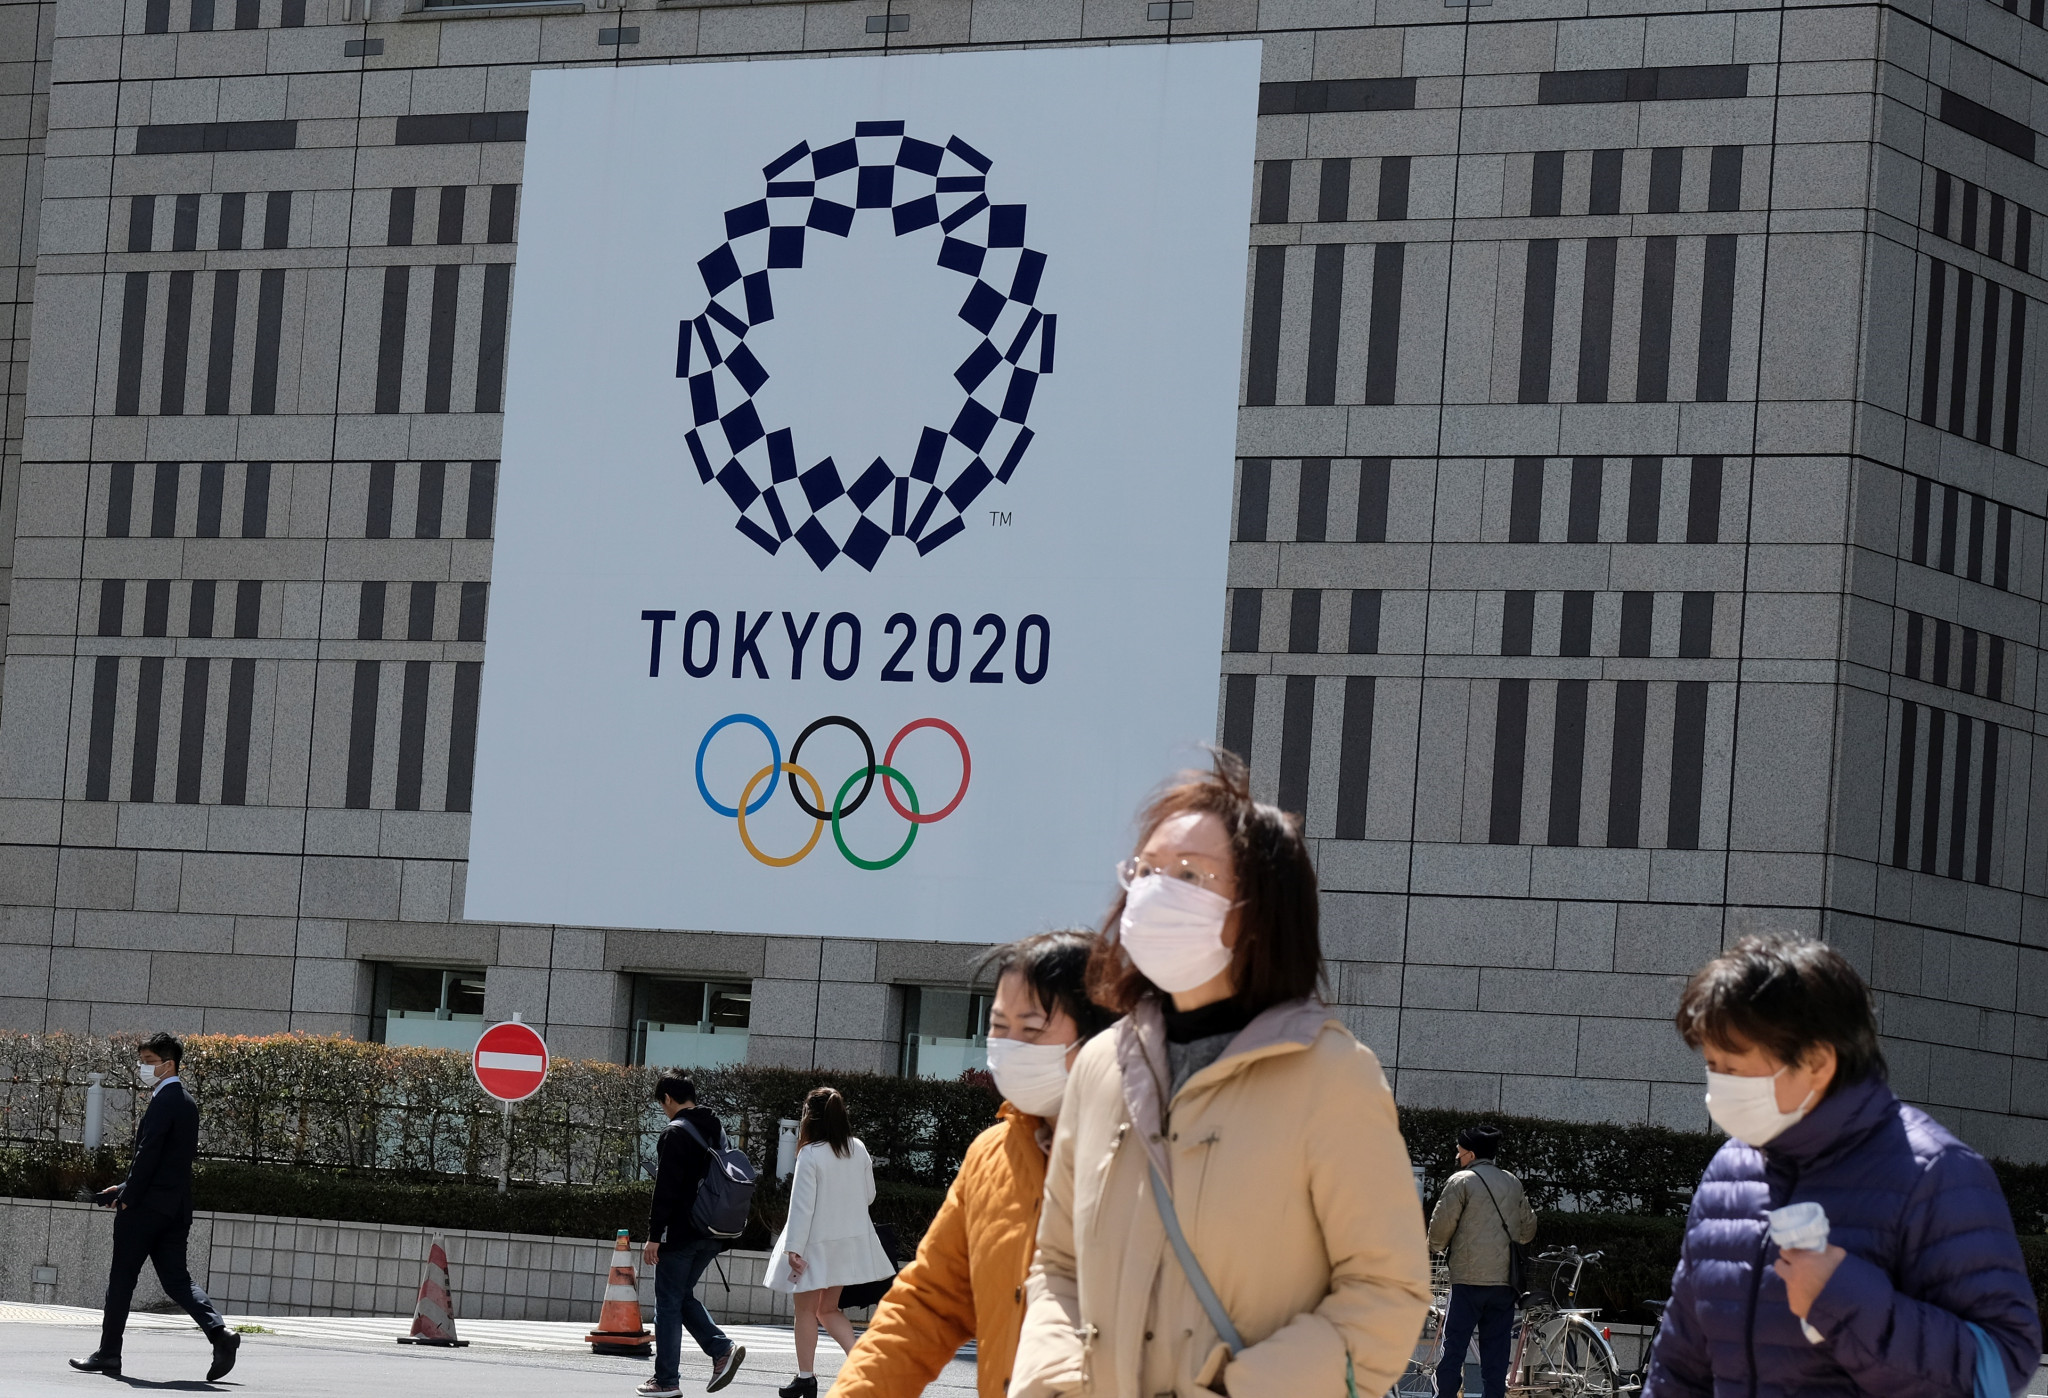 More than 60 per cent of volunteers said they were concerned about how Tokyo 2020 could take place during the pandemic ©Getty Images